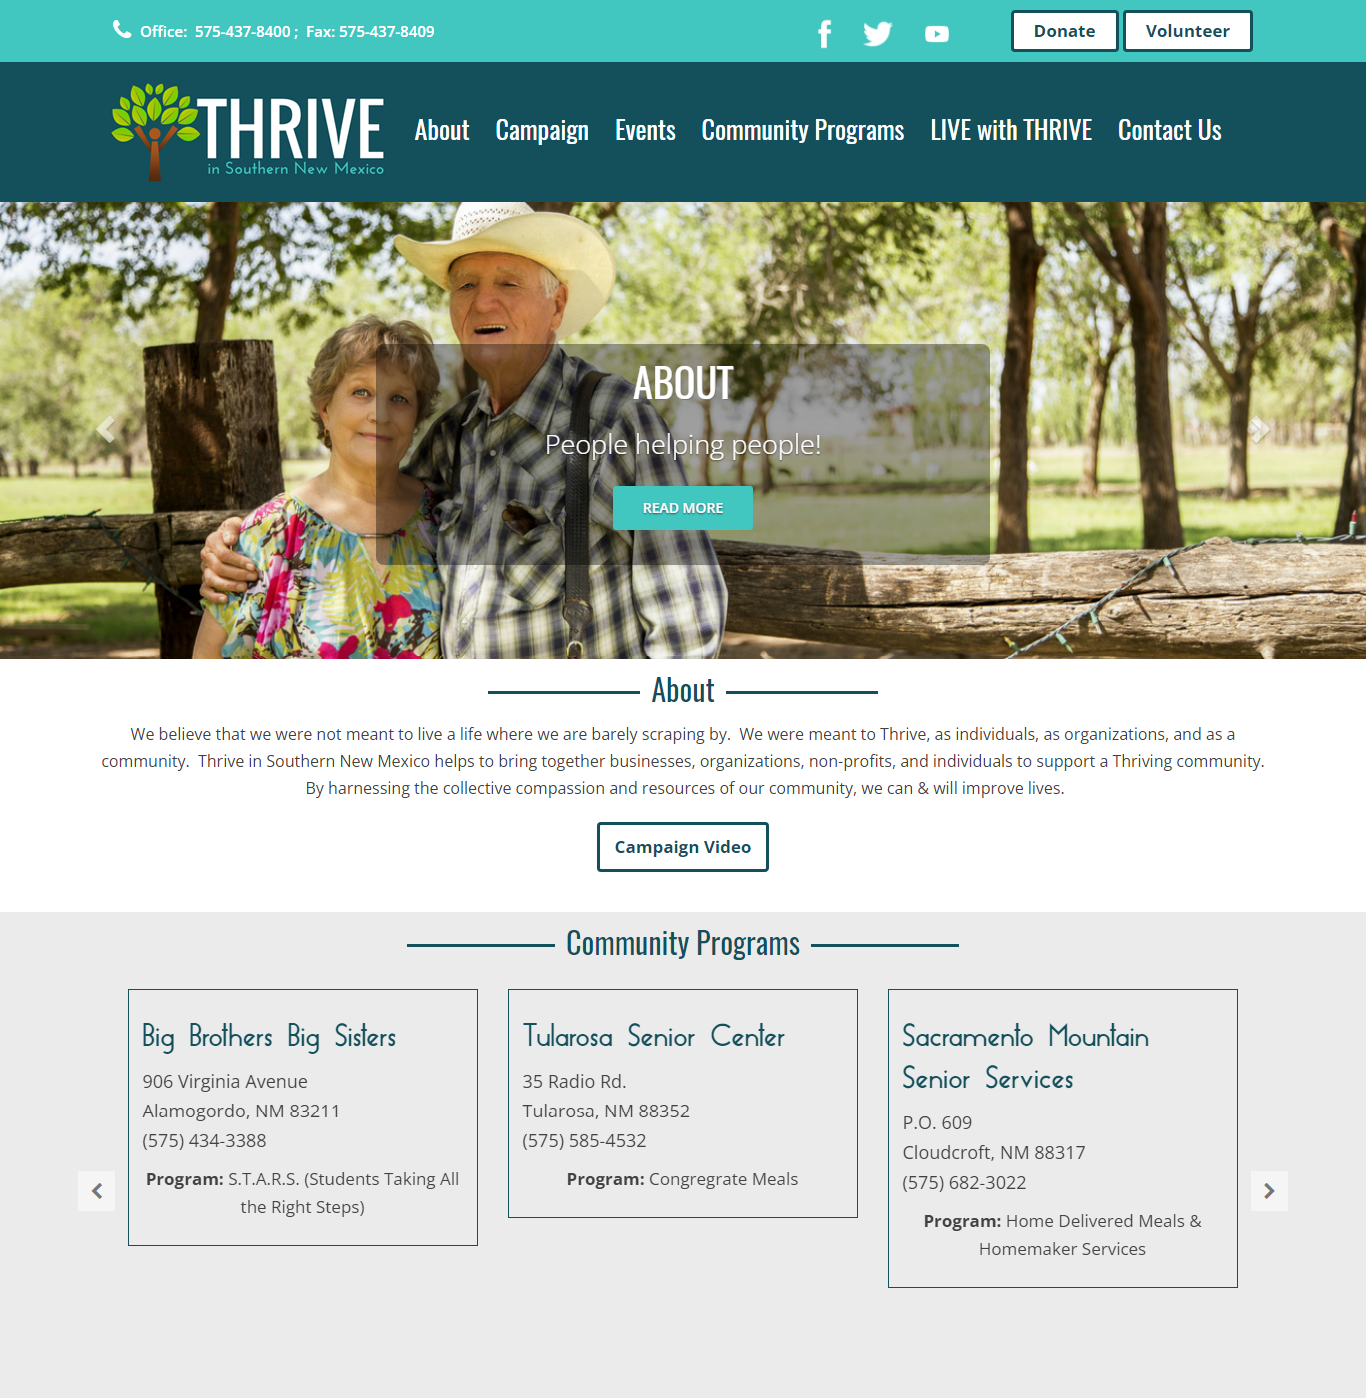 Thrive in Southern New Mexico